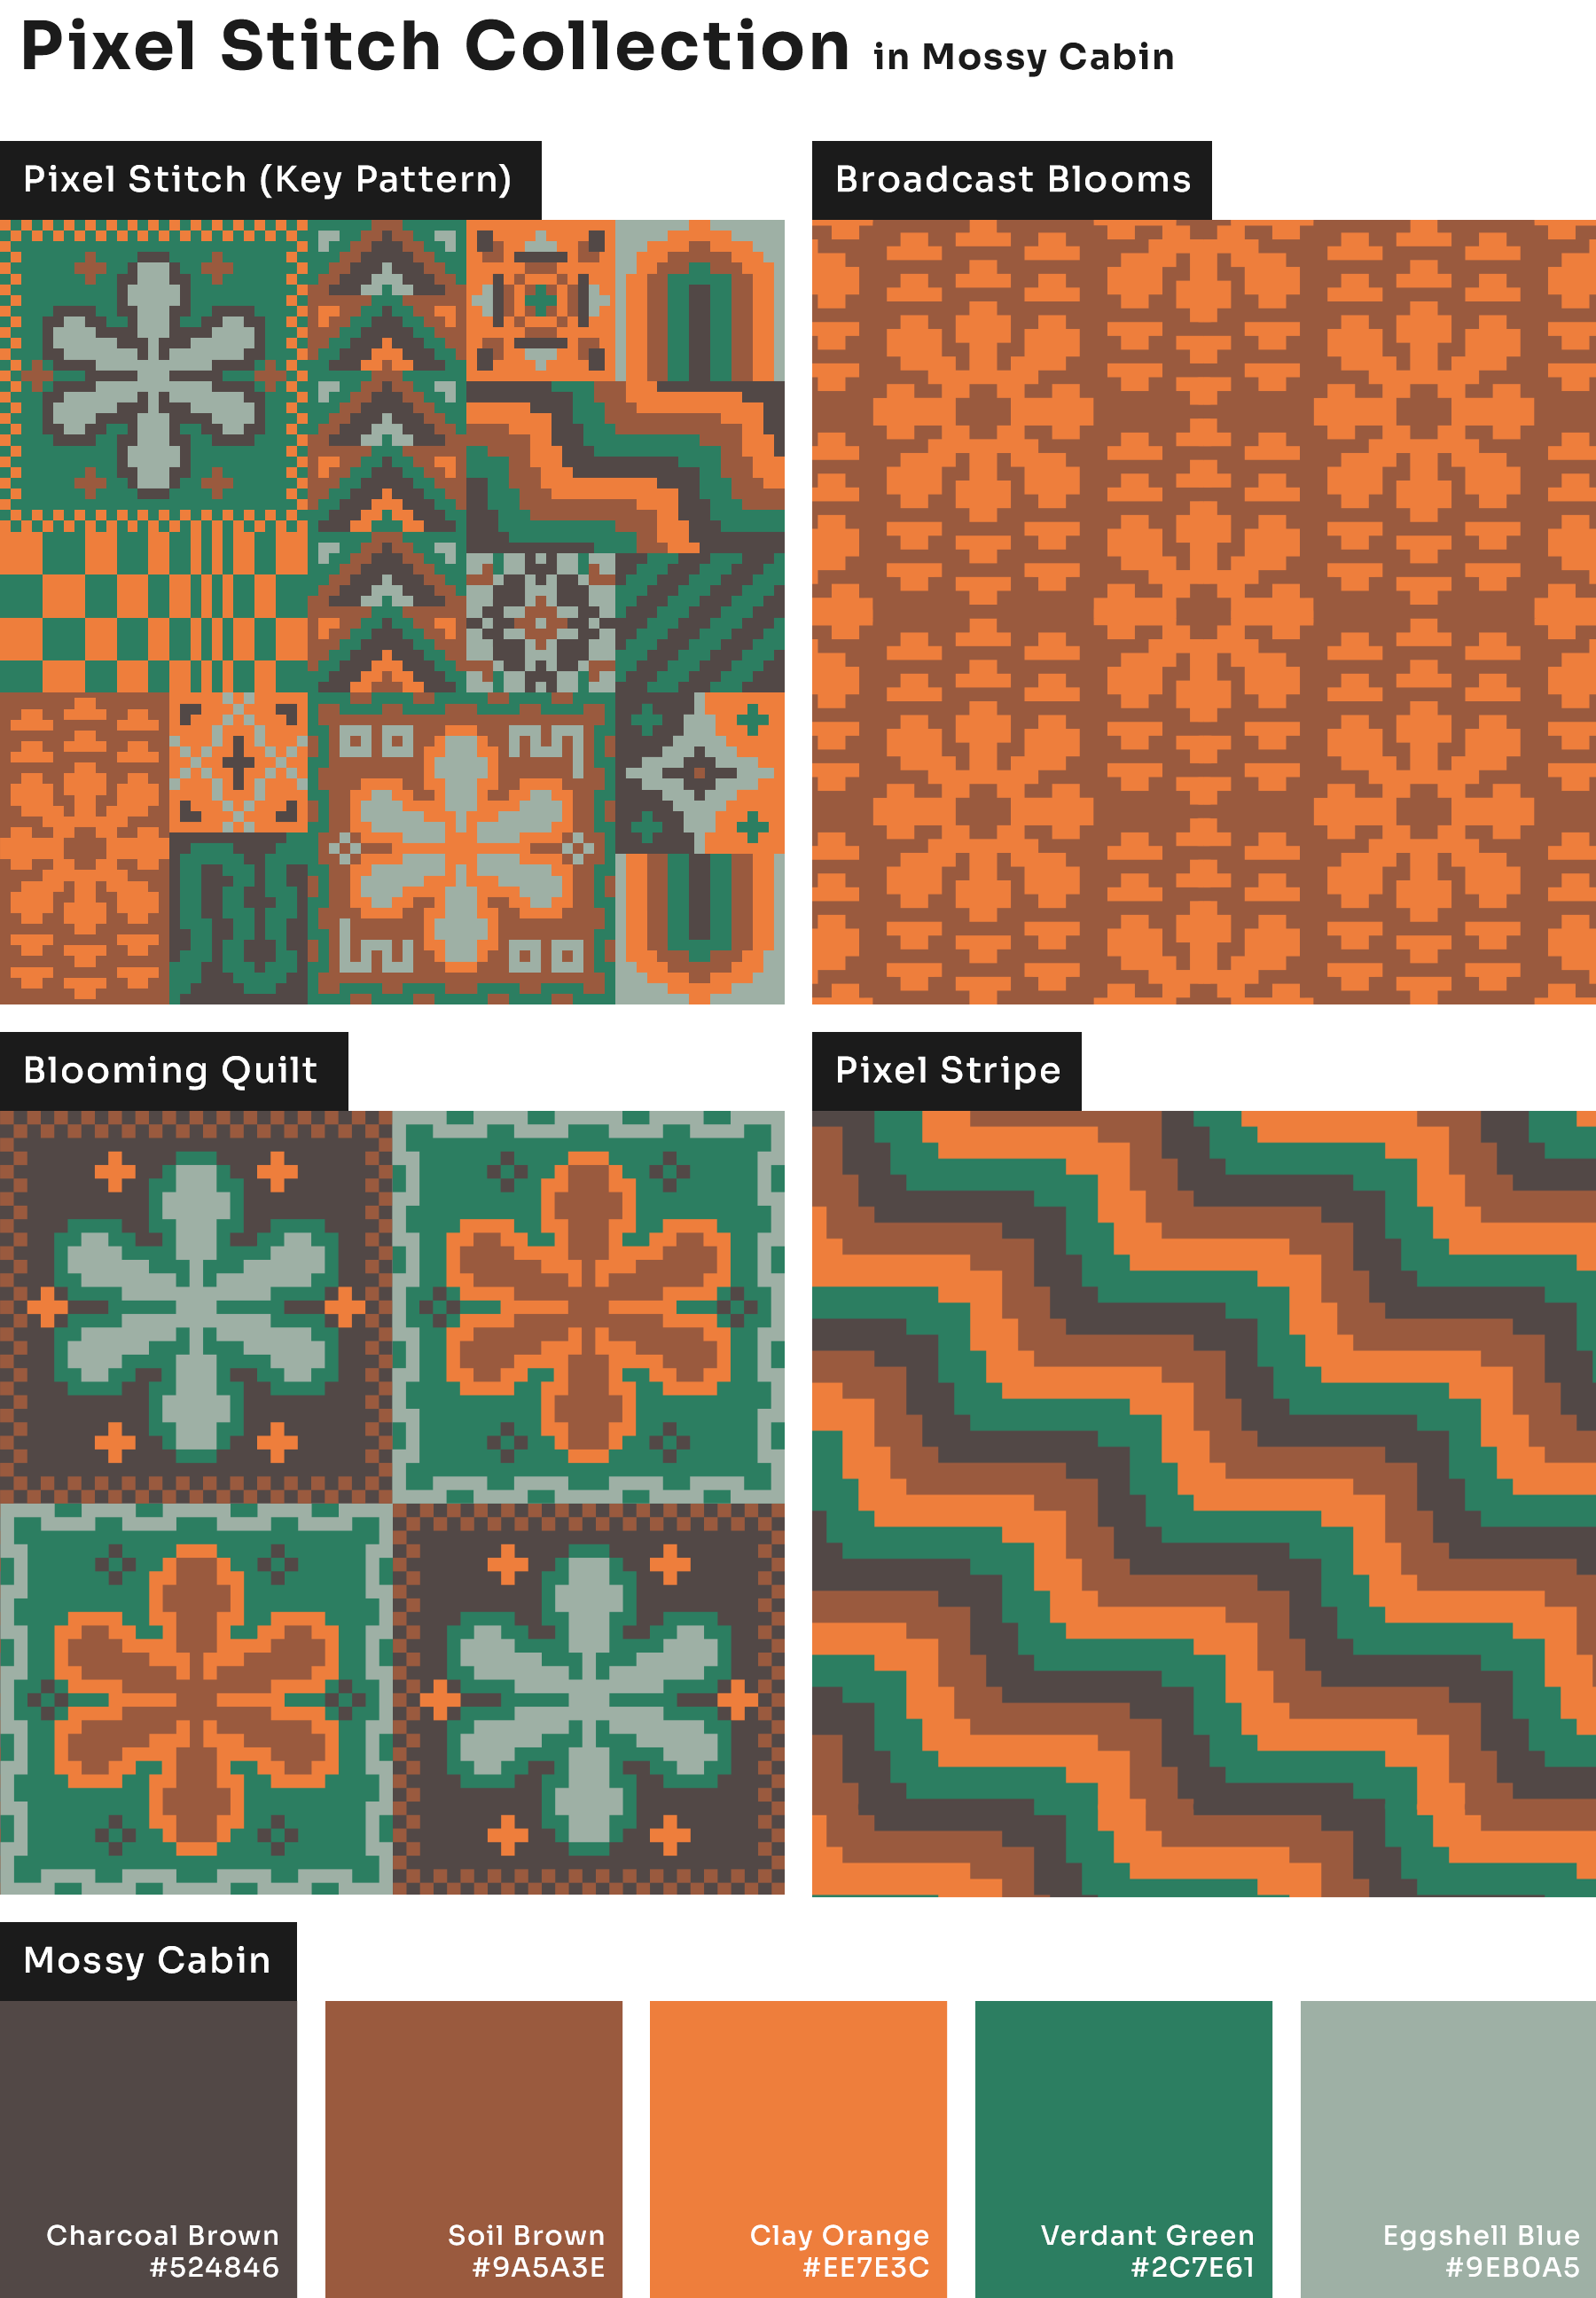 Pixel Stitch pattern collection in Mossy Cabin colorway- Charcoal brown black, soil brown, clay orange, verdant green, and eggshell pale blue. Patterns are stacked with a color palette on bottom